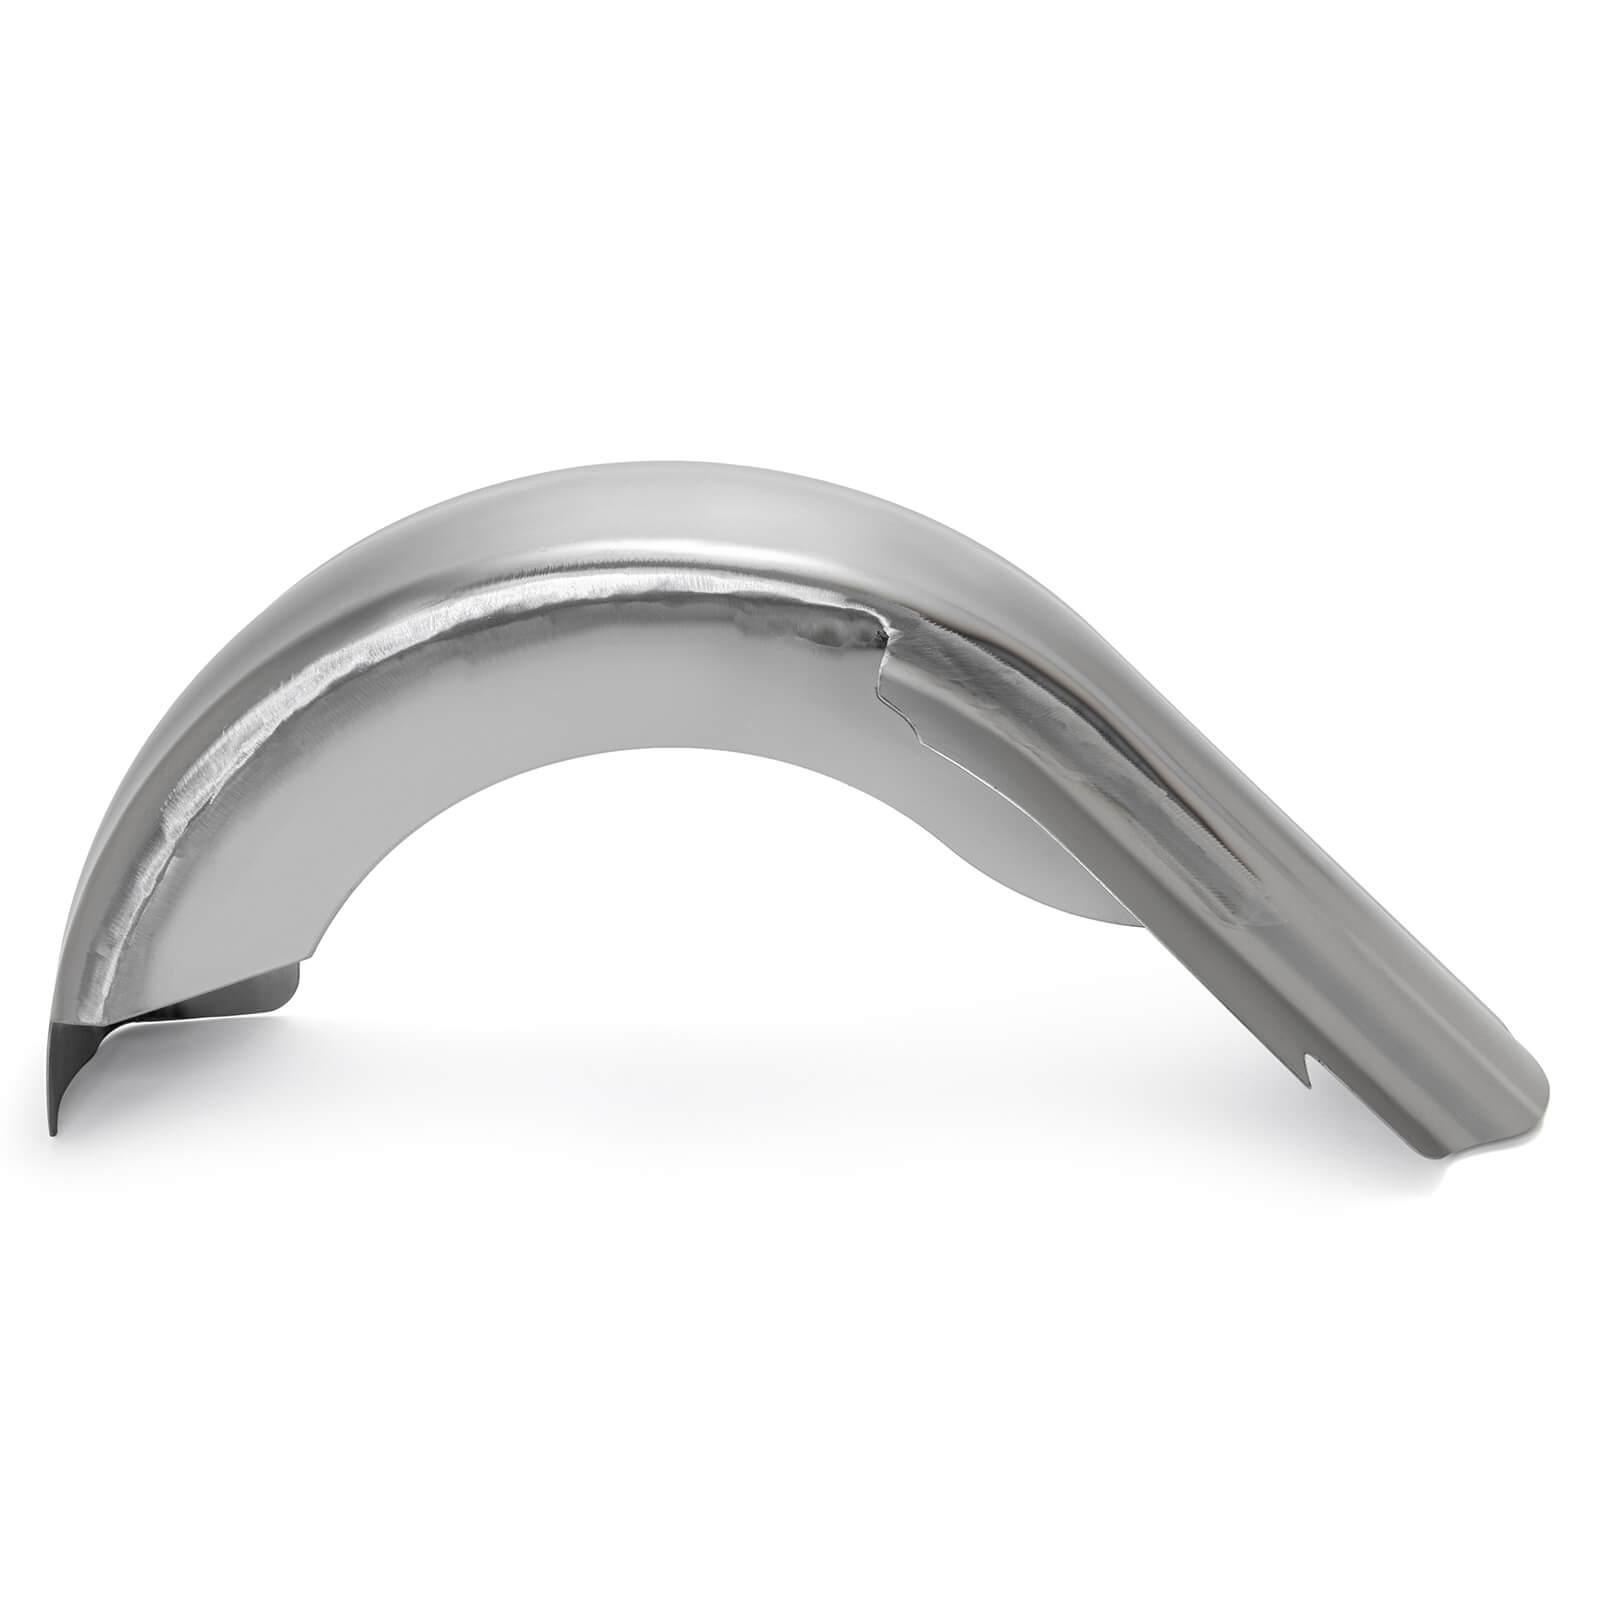 Motorcycle Rear Steel Fender for Harley Touring